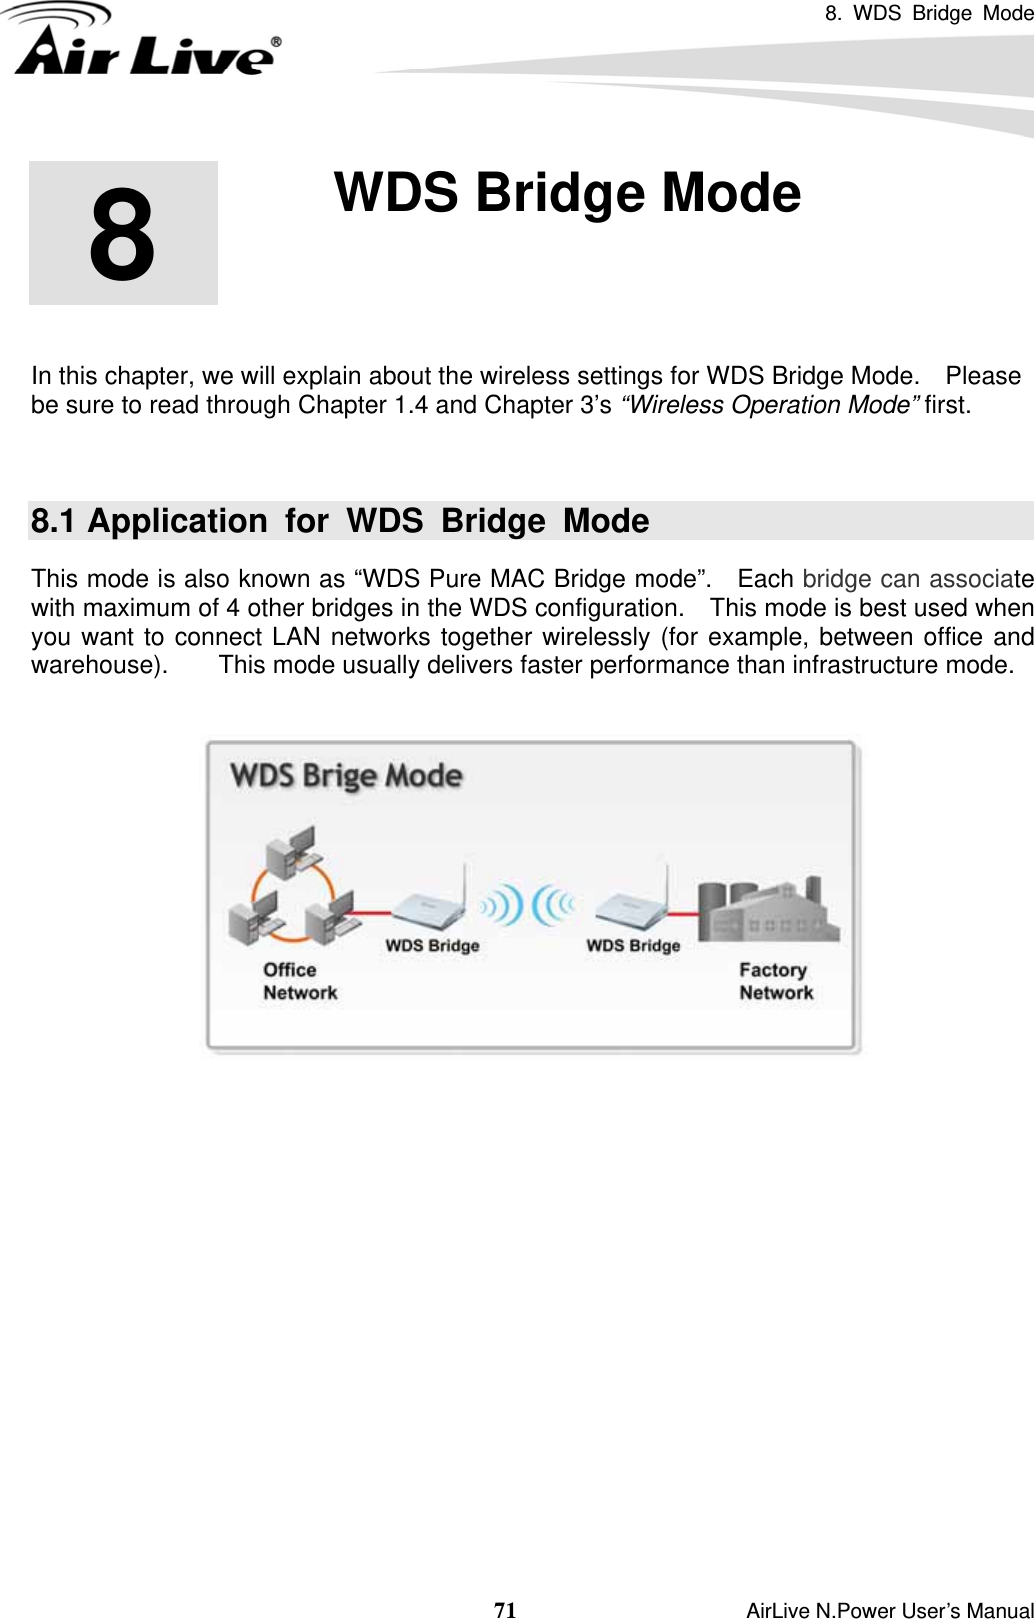 8. WDS Bridge Mode  71                    AirLive N.Power User’s Manual        In this chapter, we will explain about the wireless settings for WDS Bridge Mode.    Please be sure to read through Chapter 1.4 and Chapter 3’s “Wireless Operation Mode” first.    8.1 Application for WDS Bridge Mode This mode is also known as “WDS Pure MAC Bridge mode”.   Each bridge can associate with maximum of 4 other bridges in the WDS configuration.    This mode is best used when you want to connect LAN networks together wirelessly (for example, between office and warehouse).    This mode usually delivers faster performance than infrastructure mode.               8  8. WDS Bridge Mode  